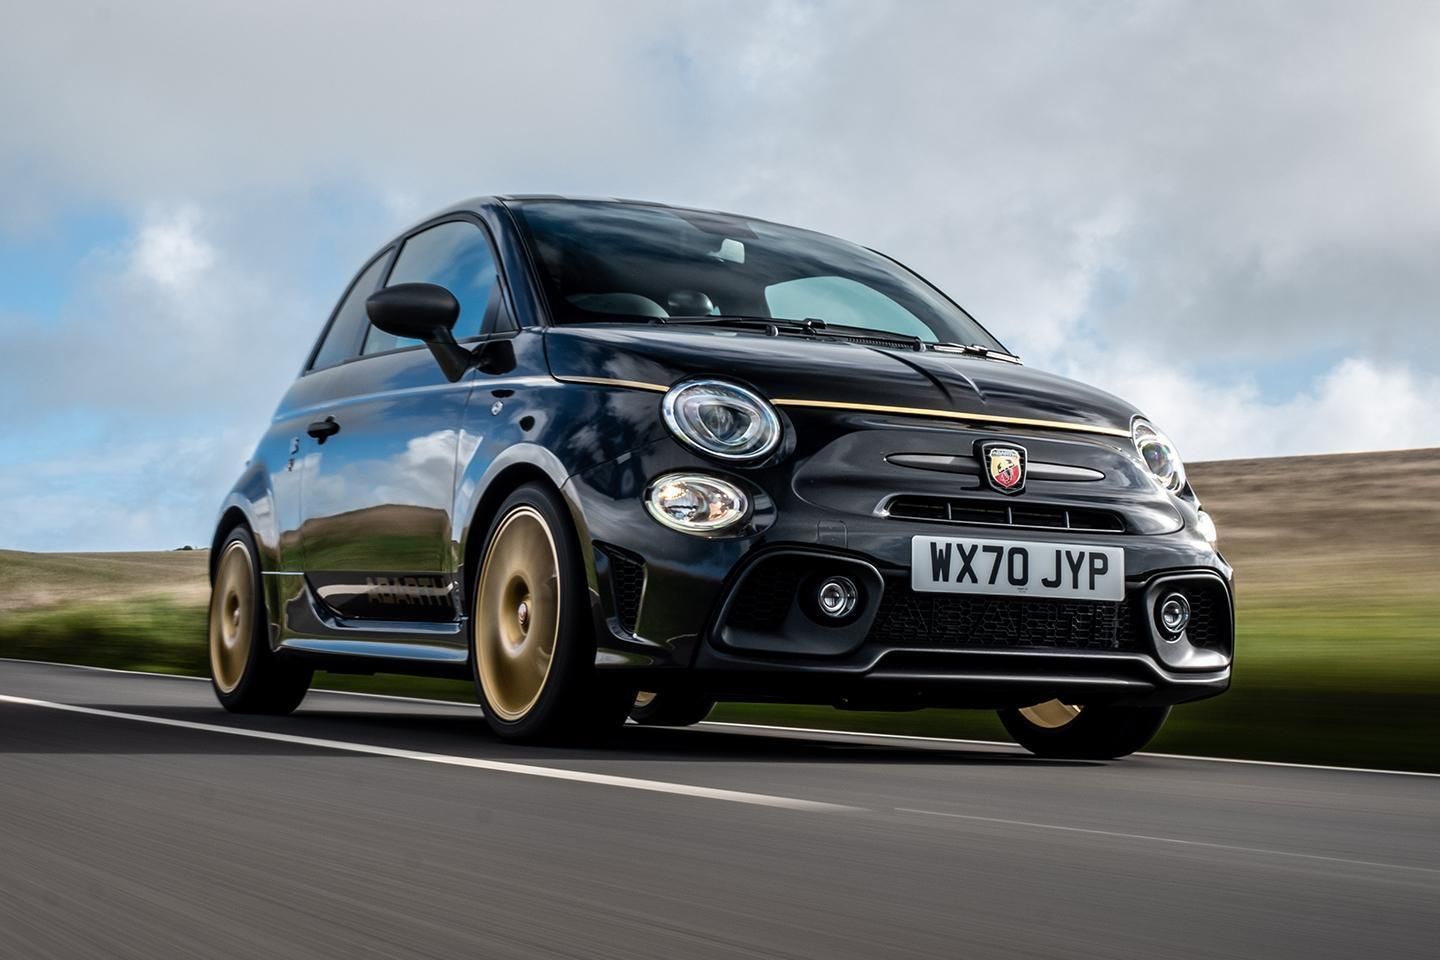 2021 Abarth 595 Scorpioneoro Is a Limited Affair Tiny Hot Hatch -  autoevolution